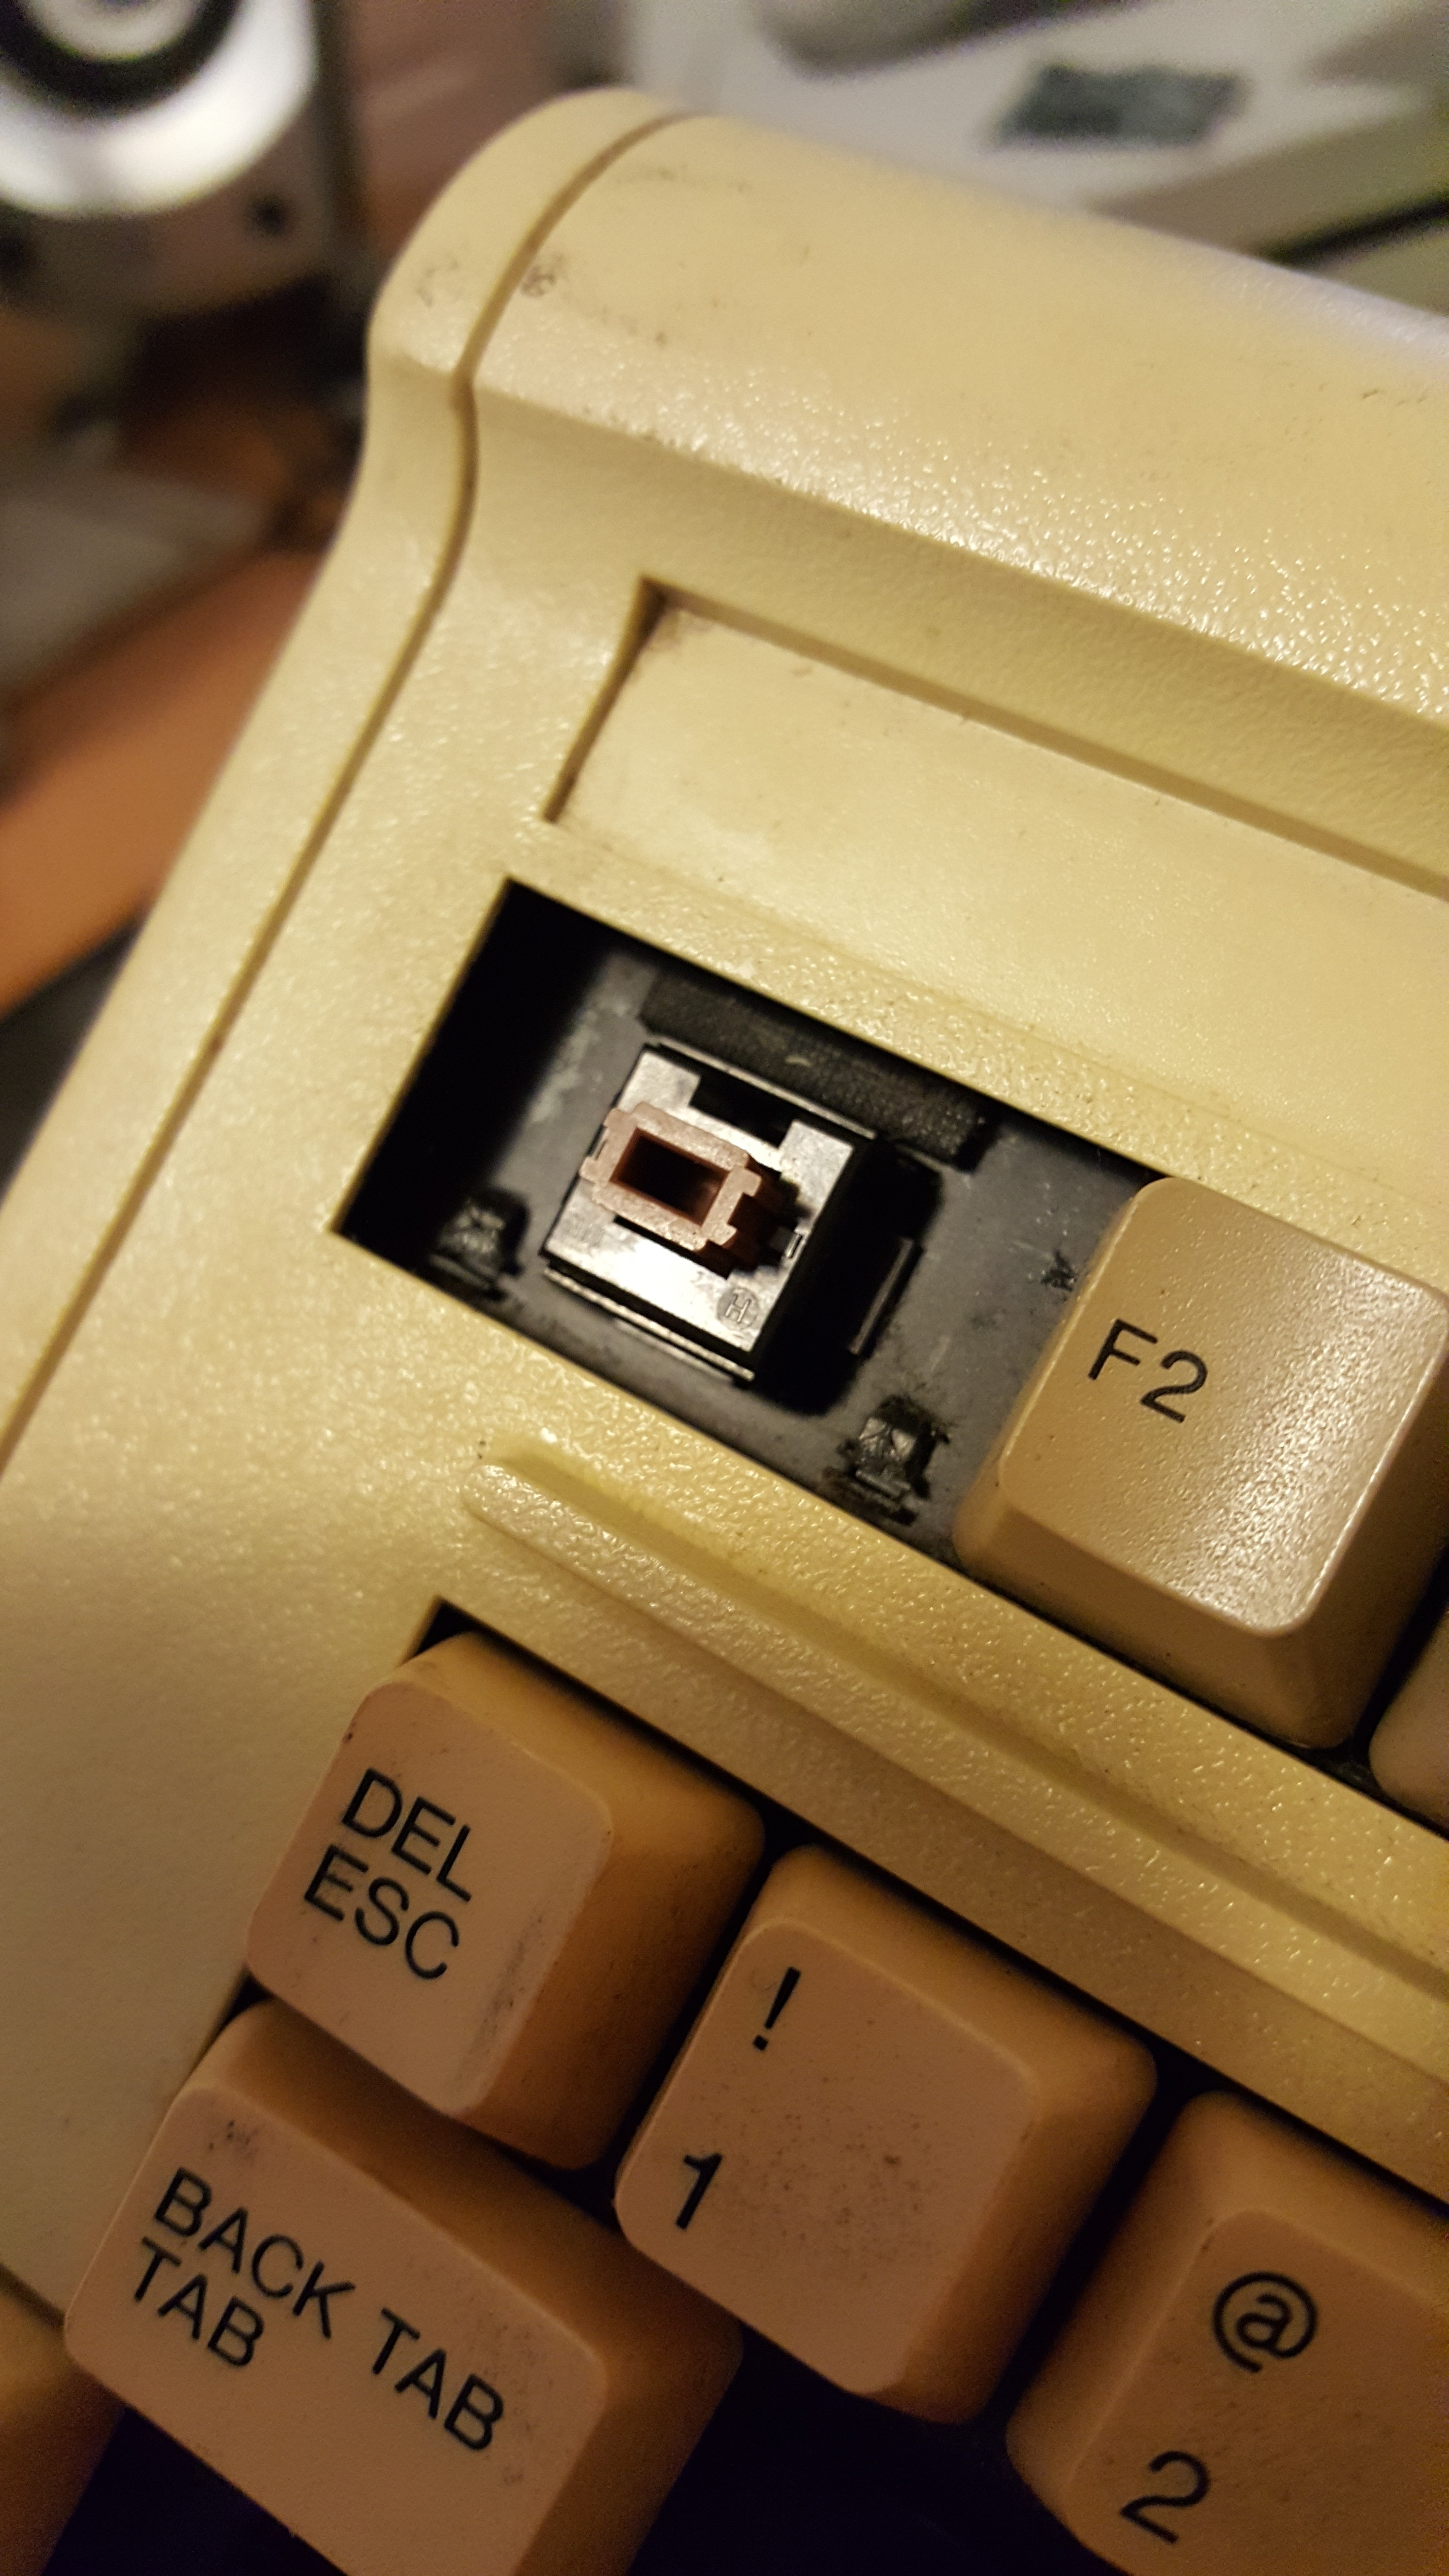 The little rubber bumpers to quieten the down stroke are a nice touch, but for some reason there's only a strip under the F keys and not the alphas or other keys. Really strange, stabilized F1 key btw - never seen this before.